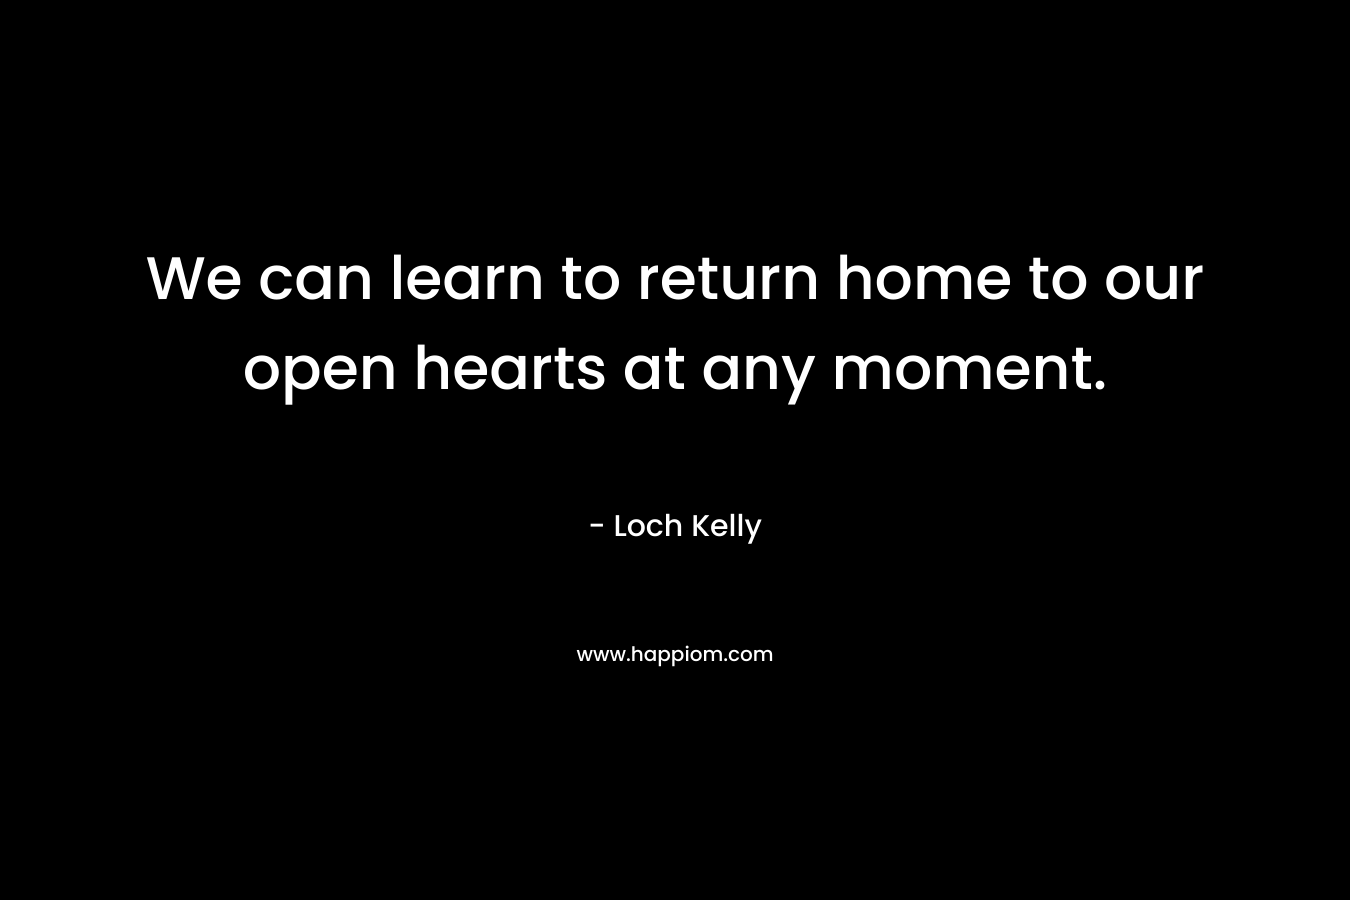 We can learn to return home to our open hearts at any moment.